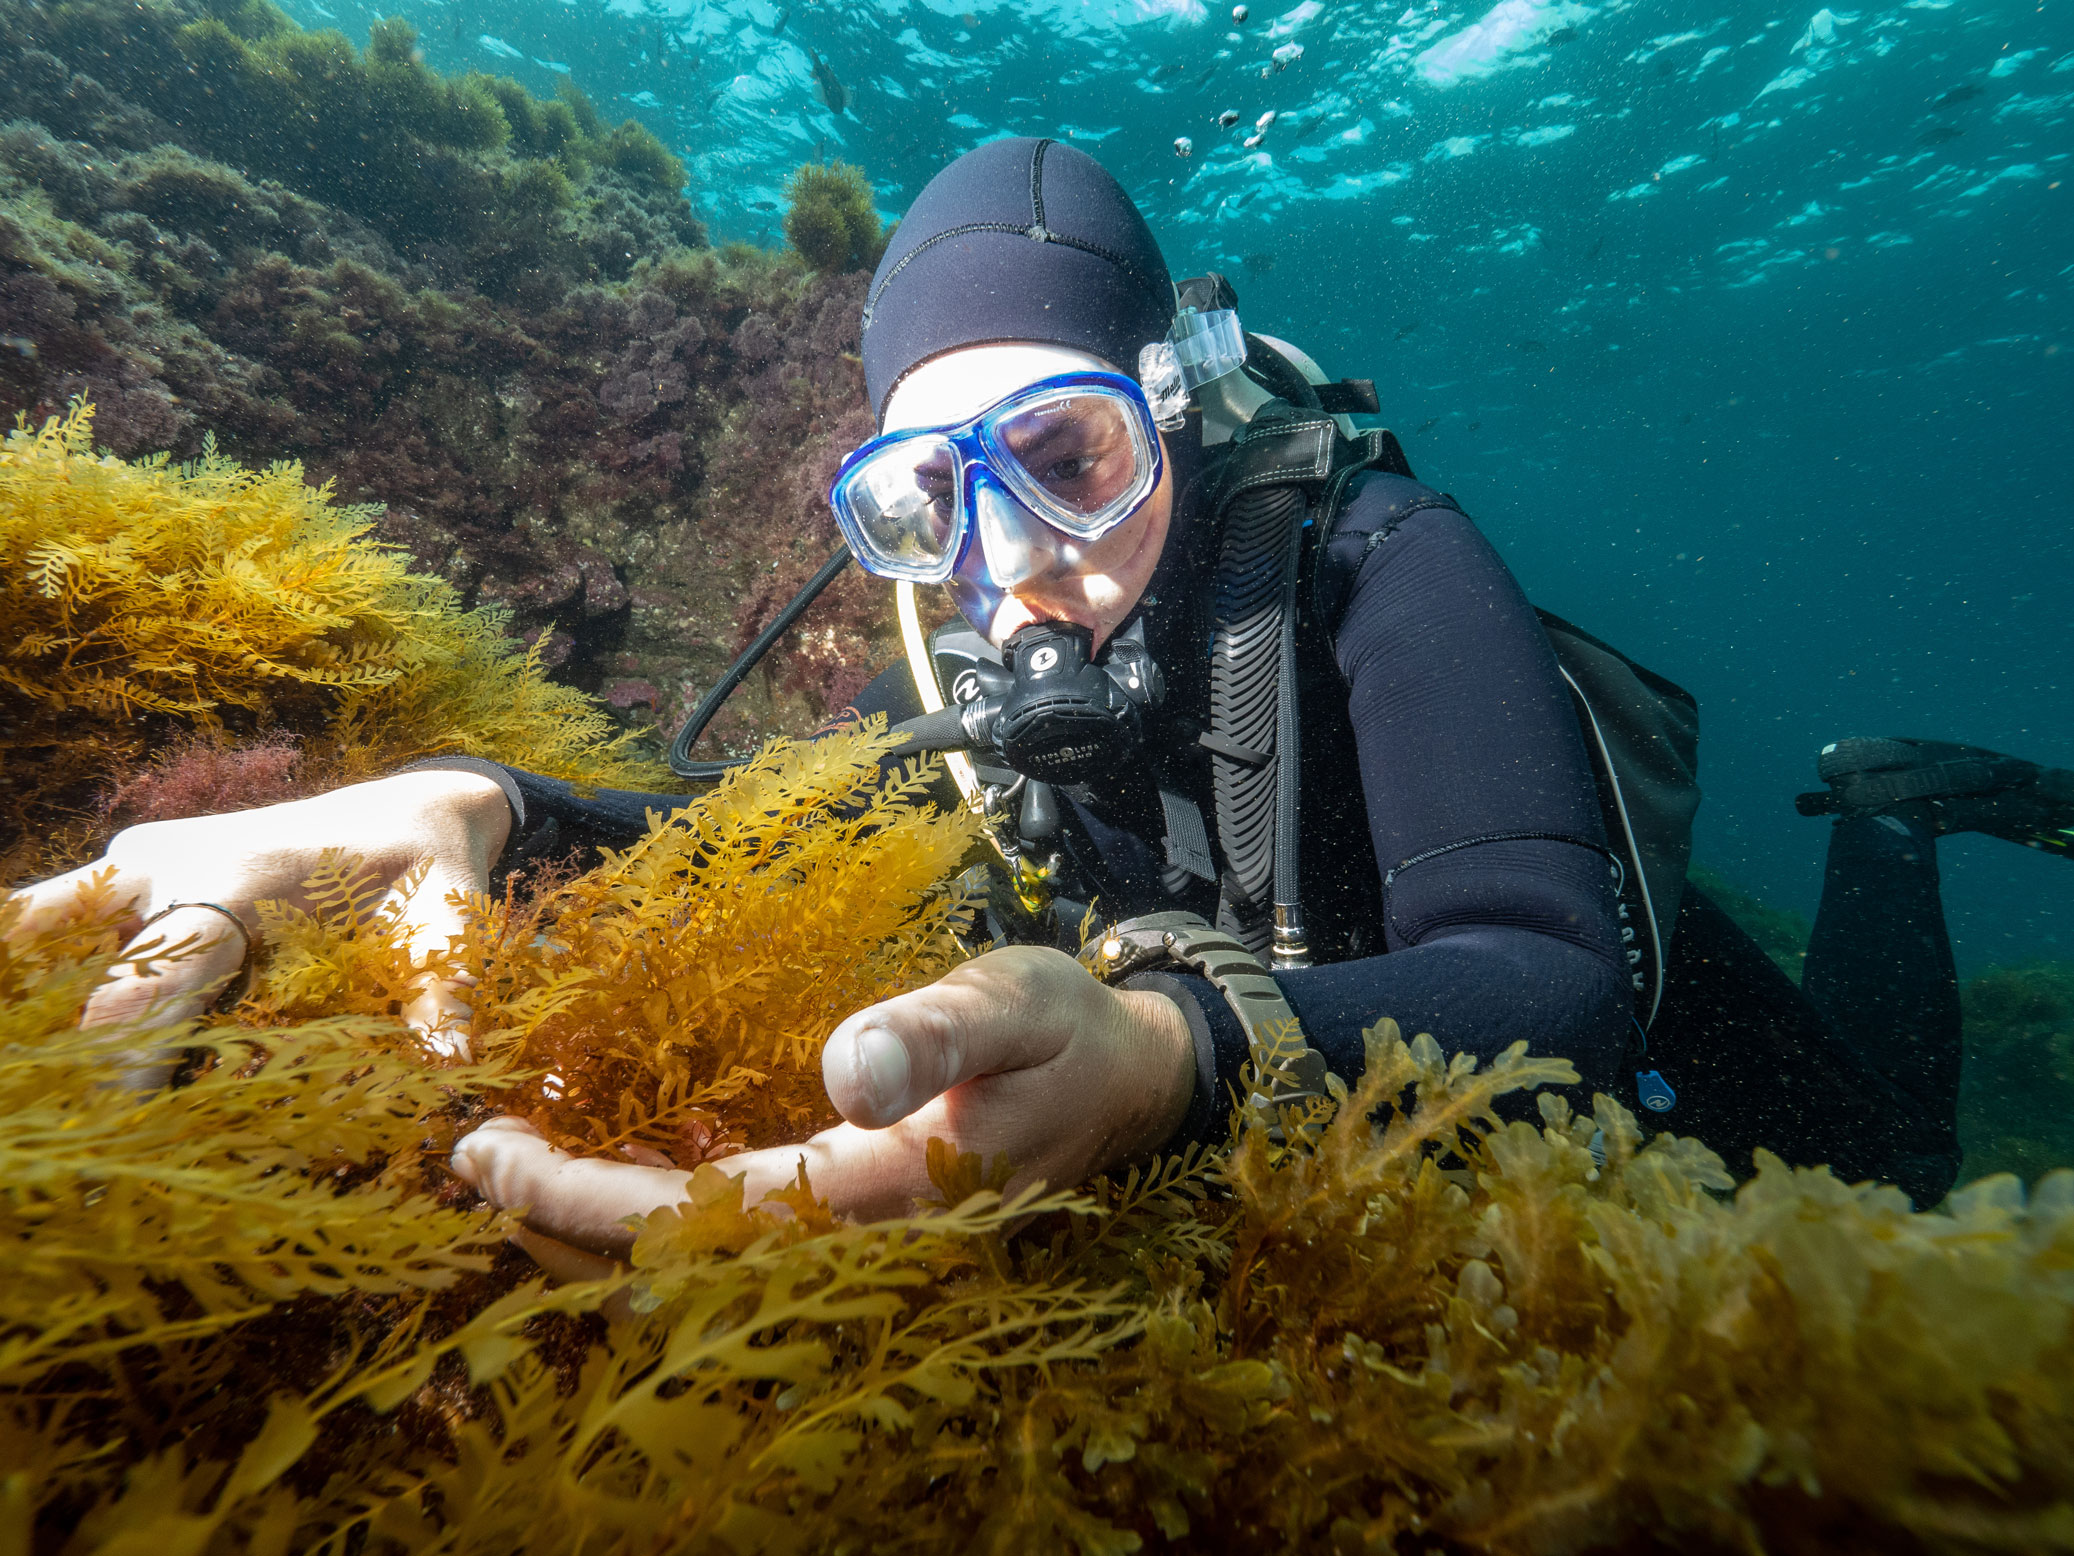 A research diver examines seaweed up close